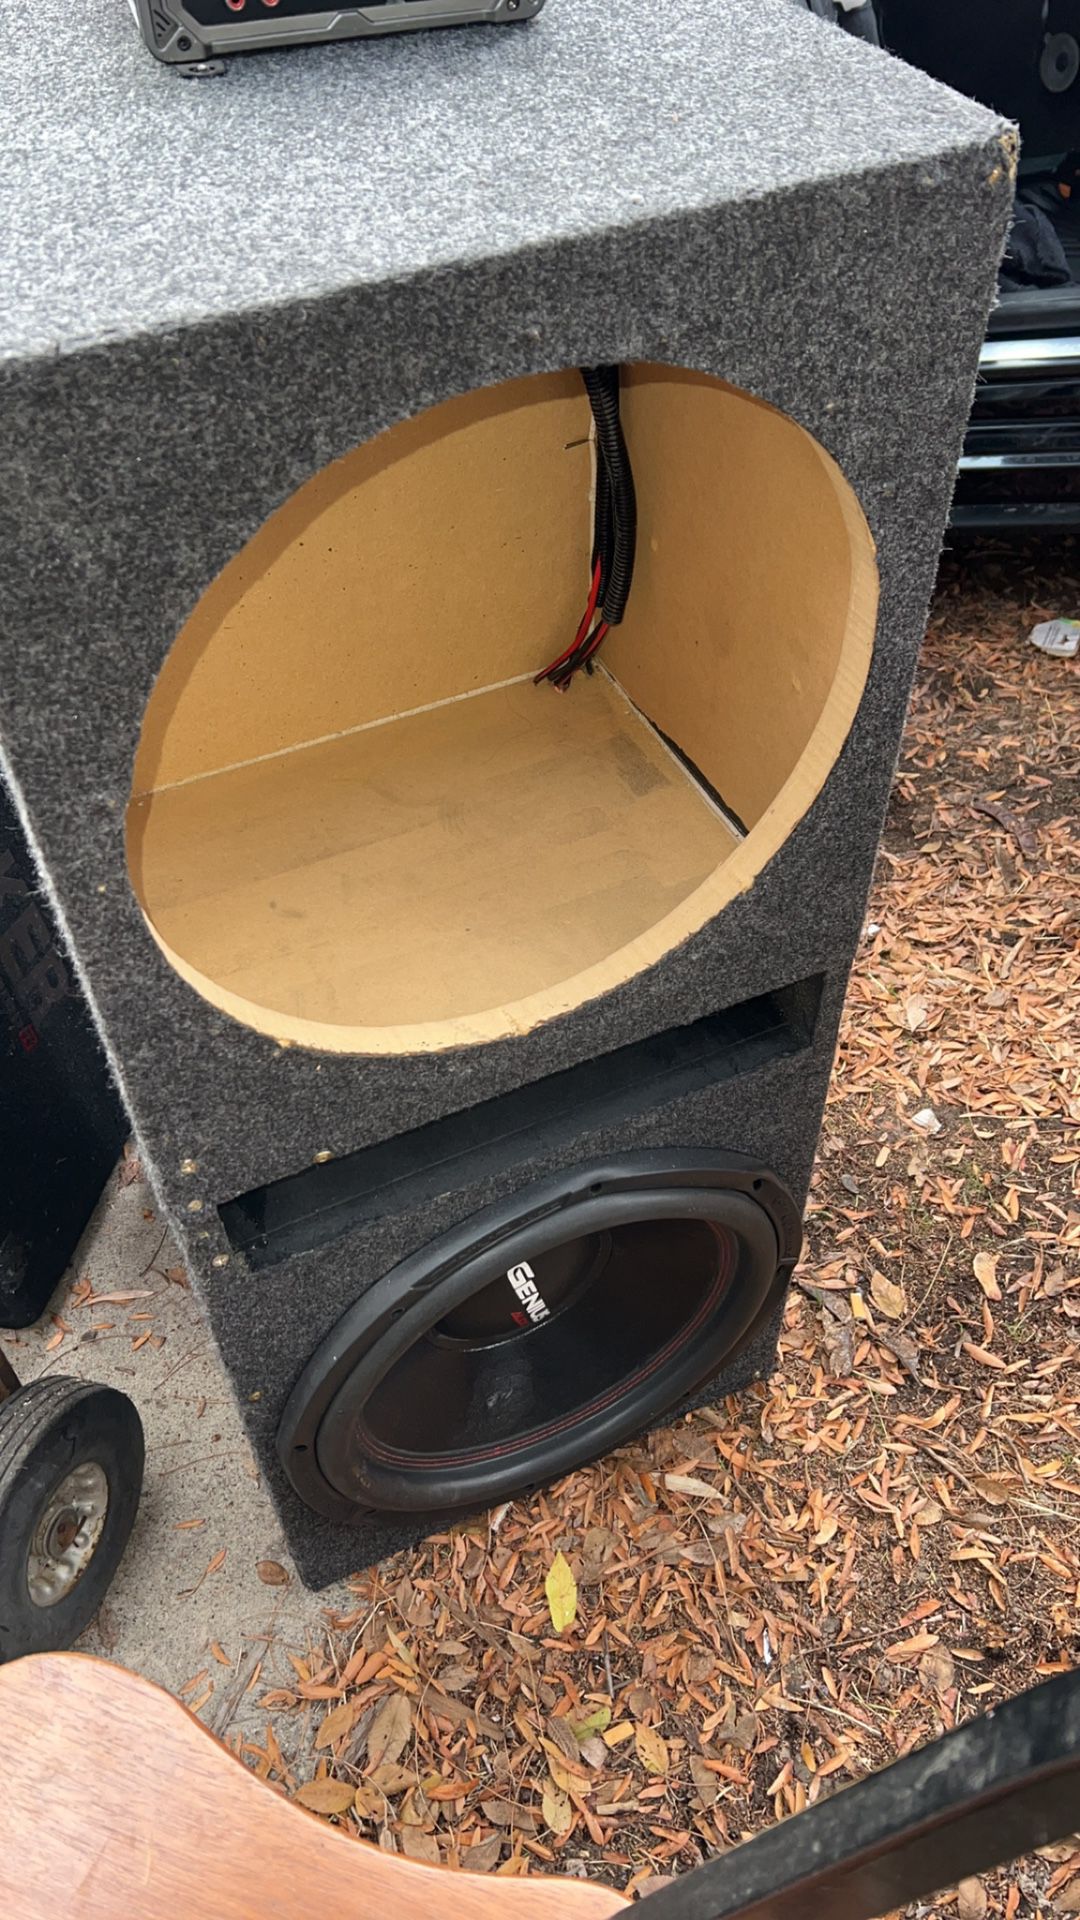 2 15” Subs